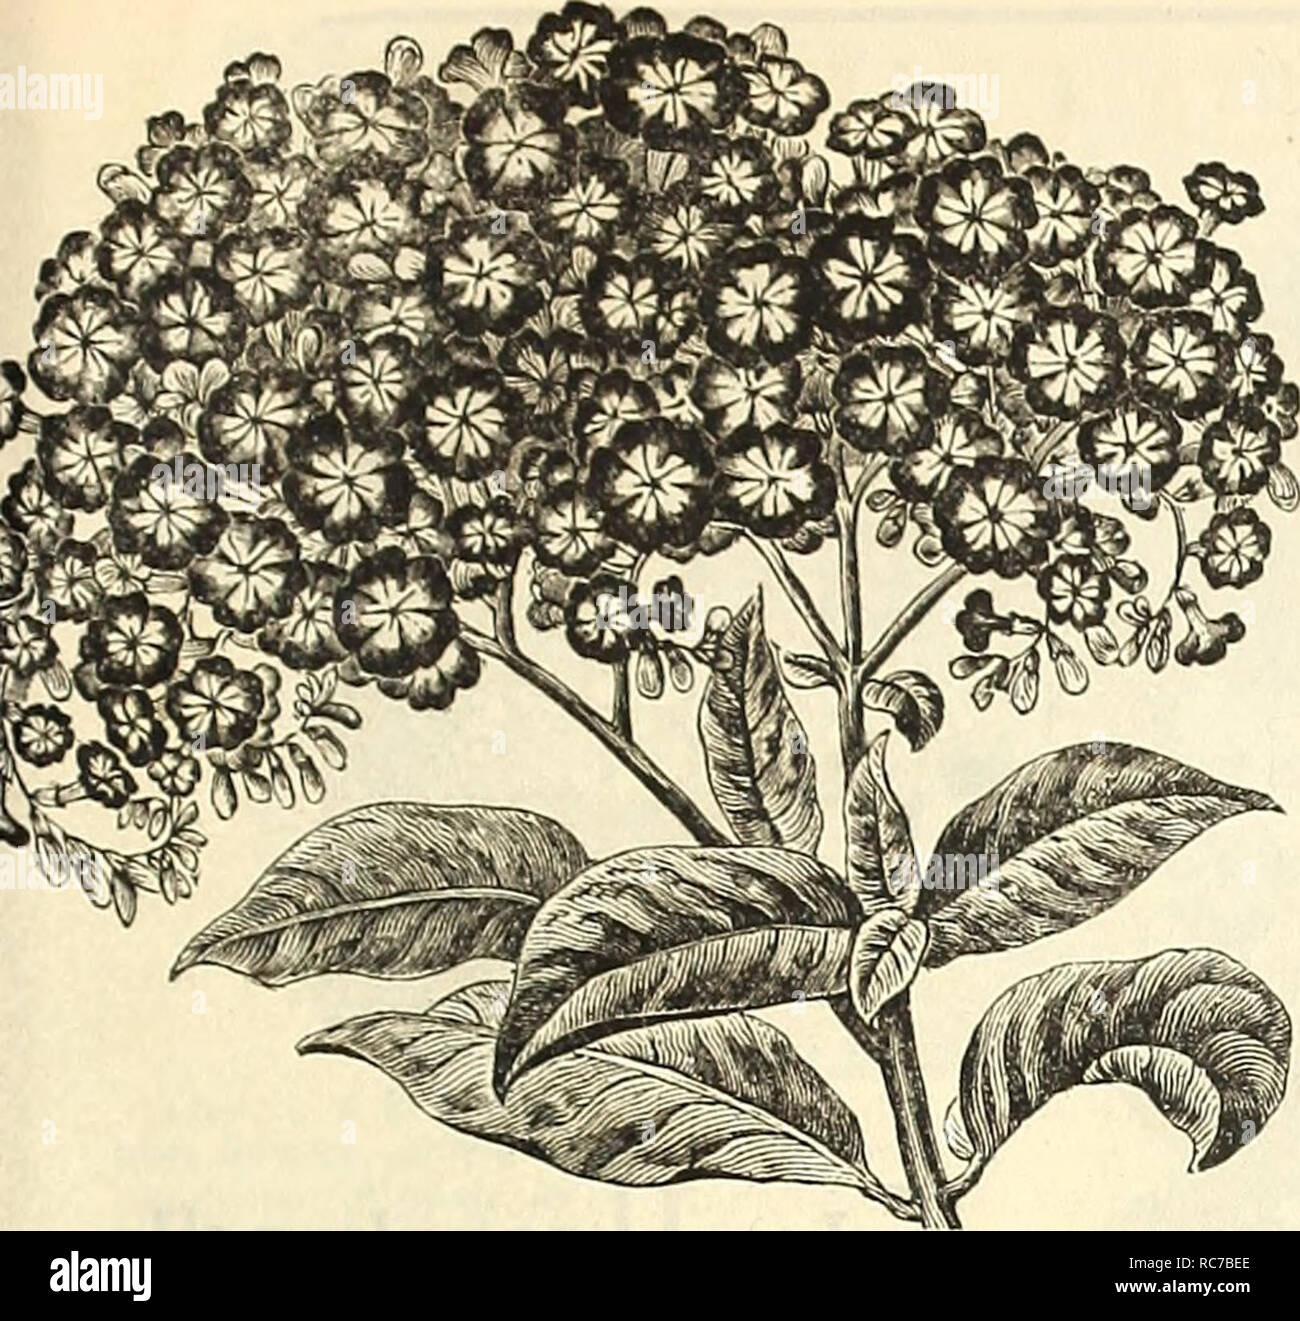 . Dreer's garden calendar for 1887. Seeds Catalogs; Nursery stock Catalogs; Gardening Catalogs; Flowers Seeds Catalogs. PLANT DEPARTMENT. 87. HELIOTROPE. Queen of the Violets. Every season brings a number of Heliotropes new in name. In this variety we have one really new, and a de- cided acquisition when acclimated ; its color is of the deepest violet-purple, with large, almost pure white eye, and very fragrant. The plant is of vigorous habit and very floriferous. 25 cts. each; 5 for $1.00. HELIOTROPES. Chieftain. Lilac, large truss. Grandiflorum. Pale lilac. Mad. de Blonay. Large truss, nearl Stock Photo